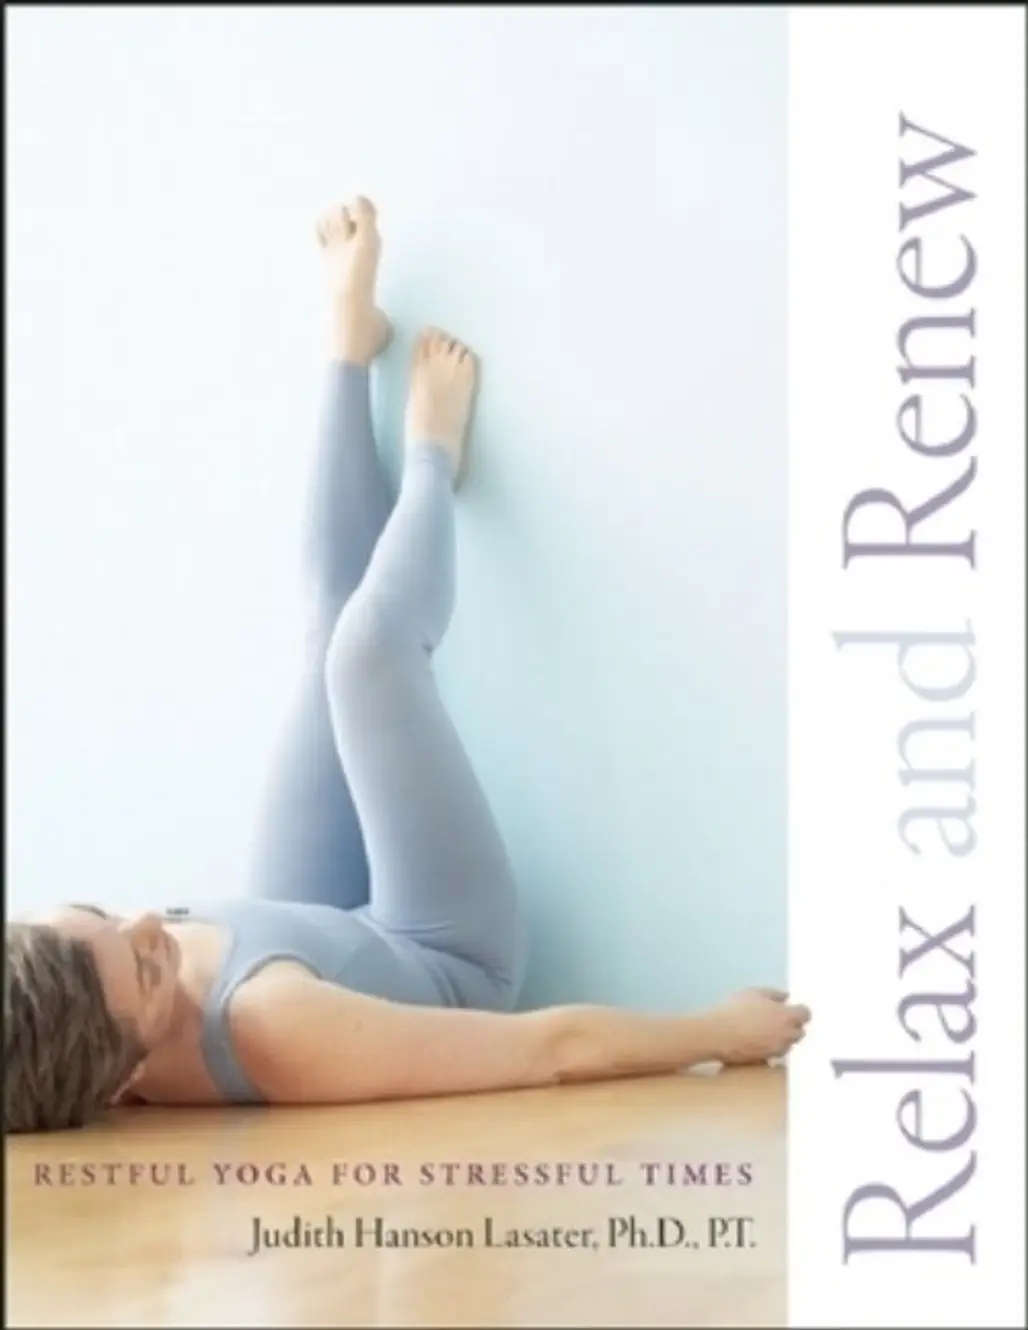 Relax and Renew Restful Yoga for Stressful Times – by Judith Hanson Laseter